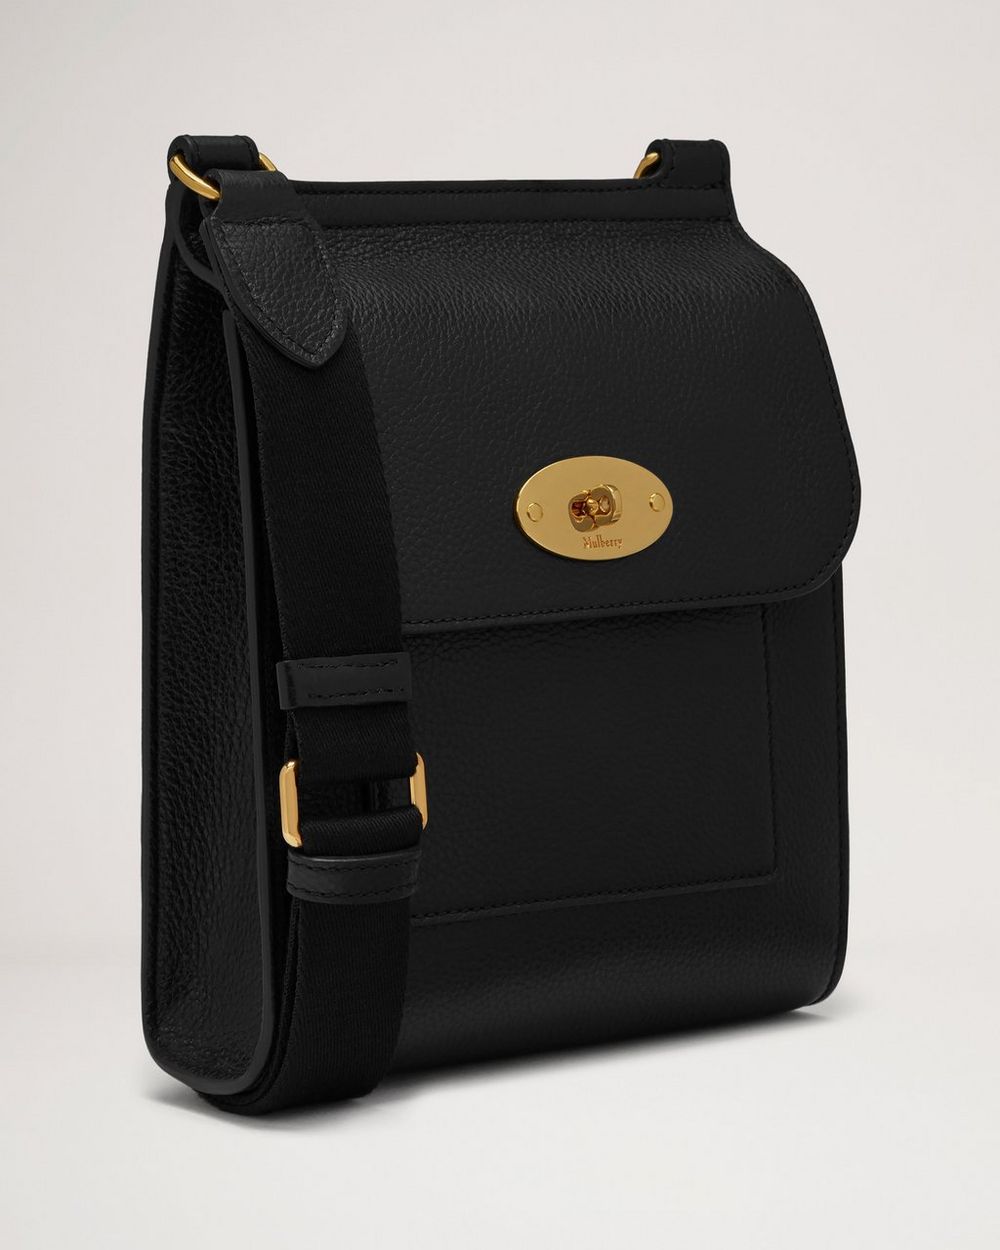 Mulberry Small Antony Leather Messenger Bag - Farfetch